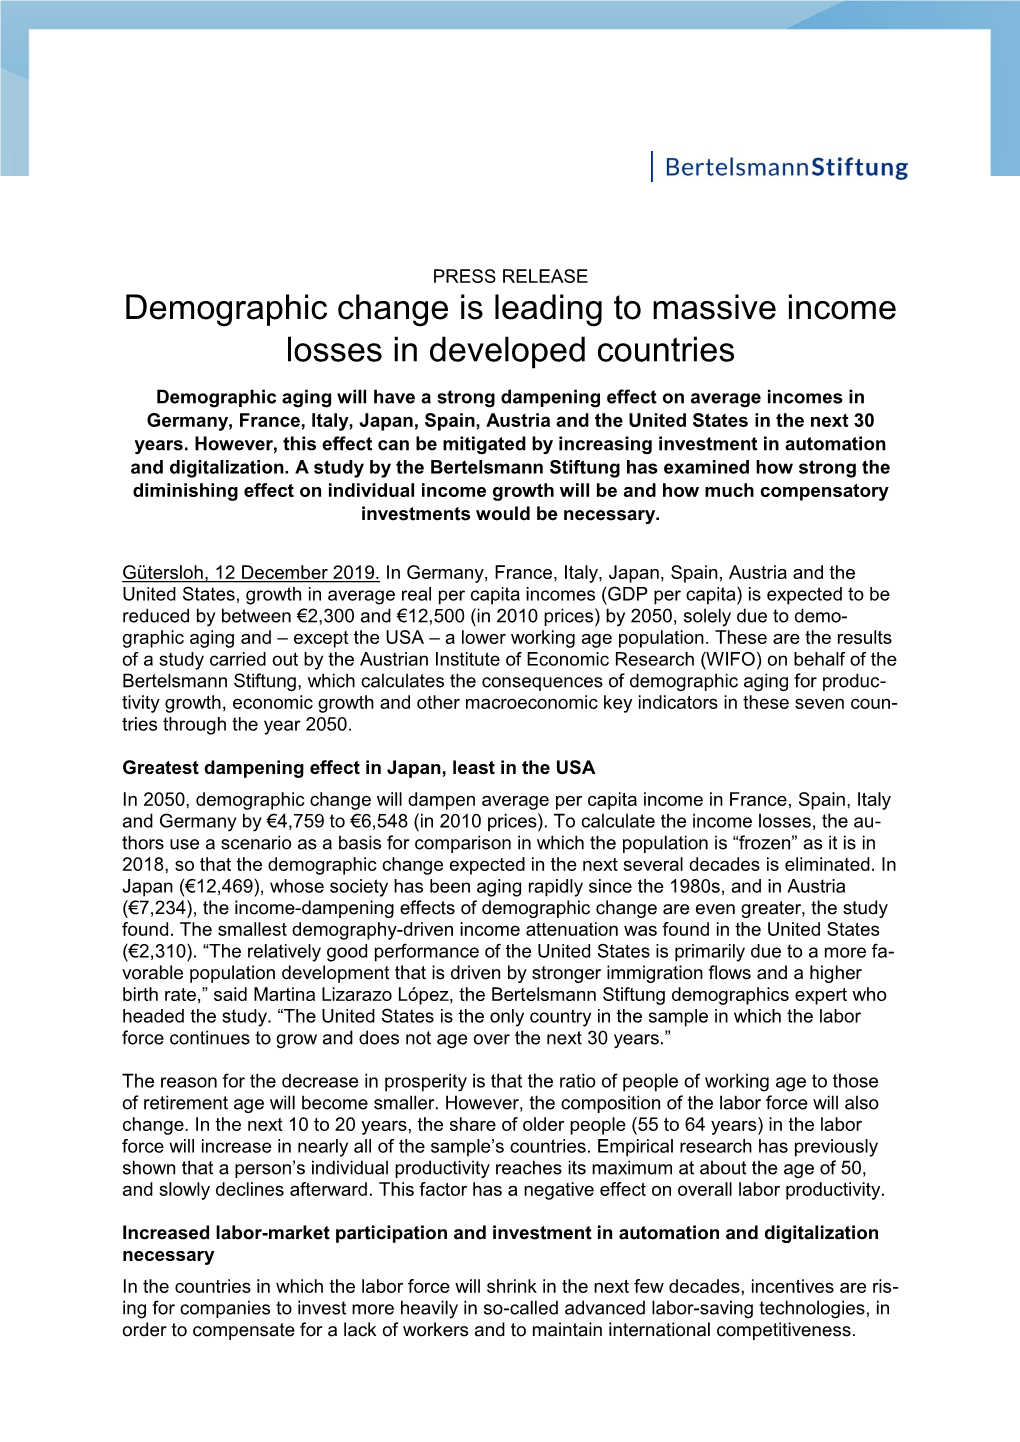 Demographic Change Is Leading to Massive Income Losses in Developed Countries